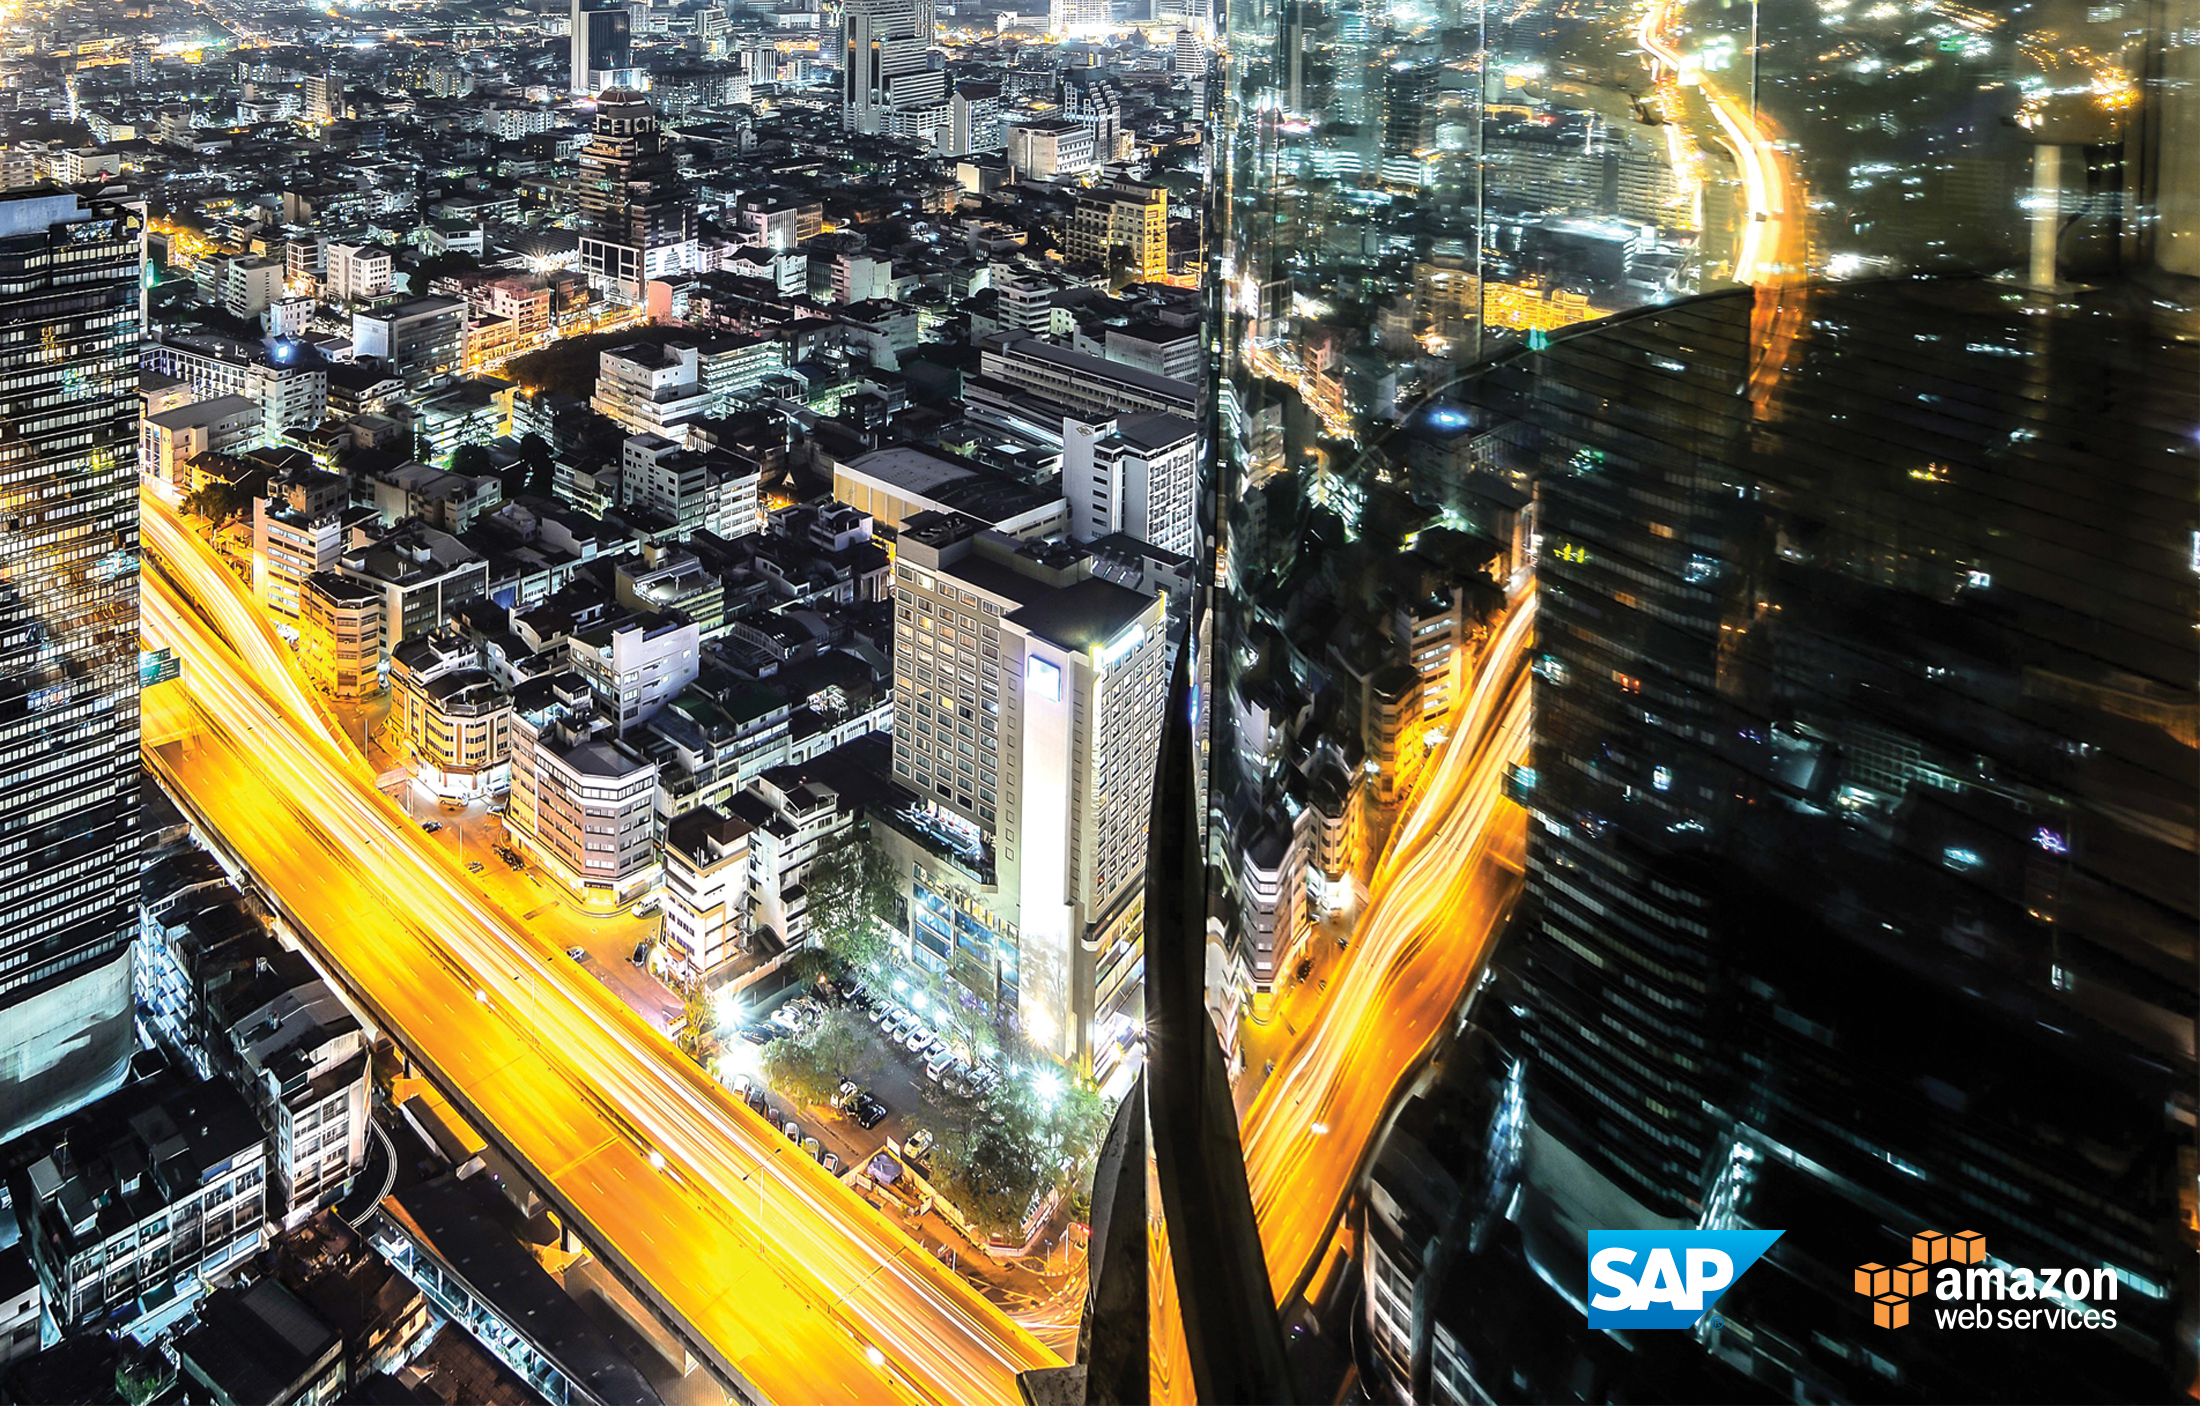 SAP and Amazon Web Services data warehouse event